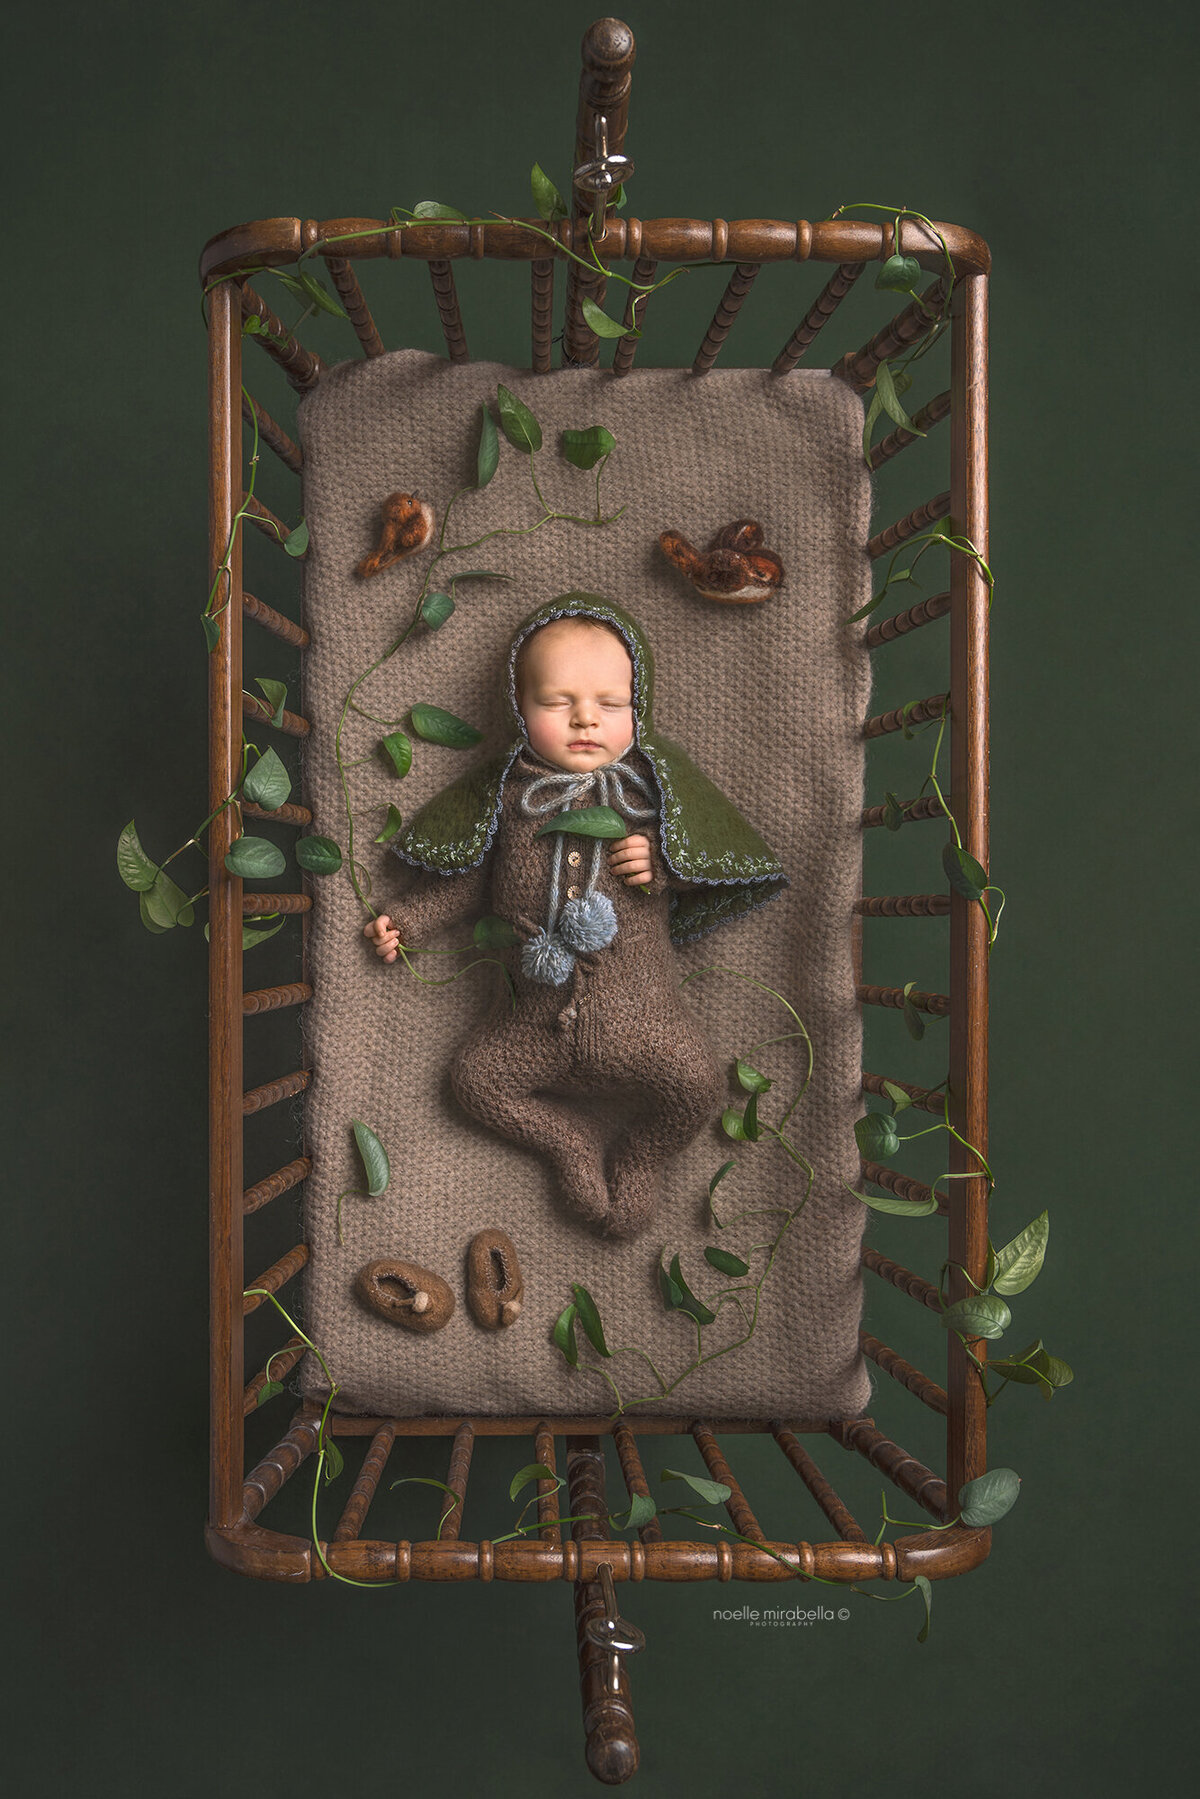 Baby in brown knit sleeper and green embroidered cape sleeping in a cradle.